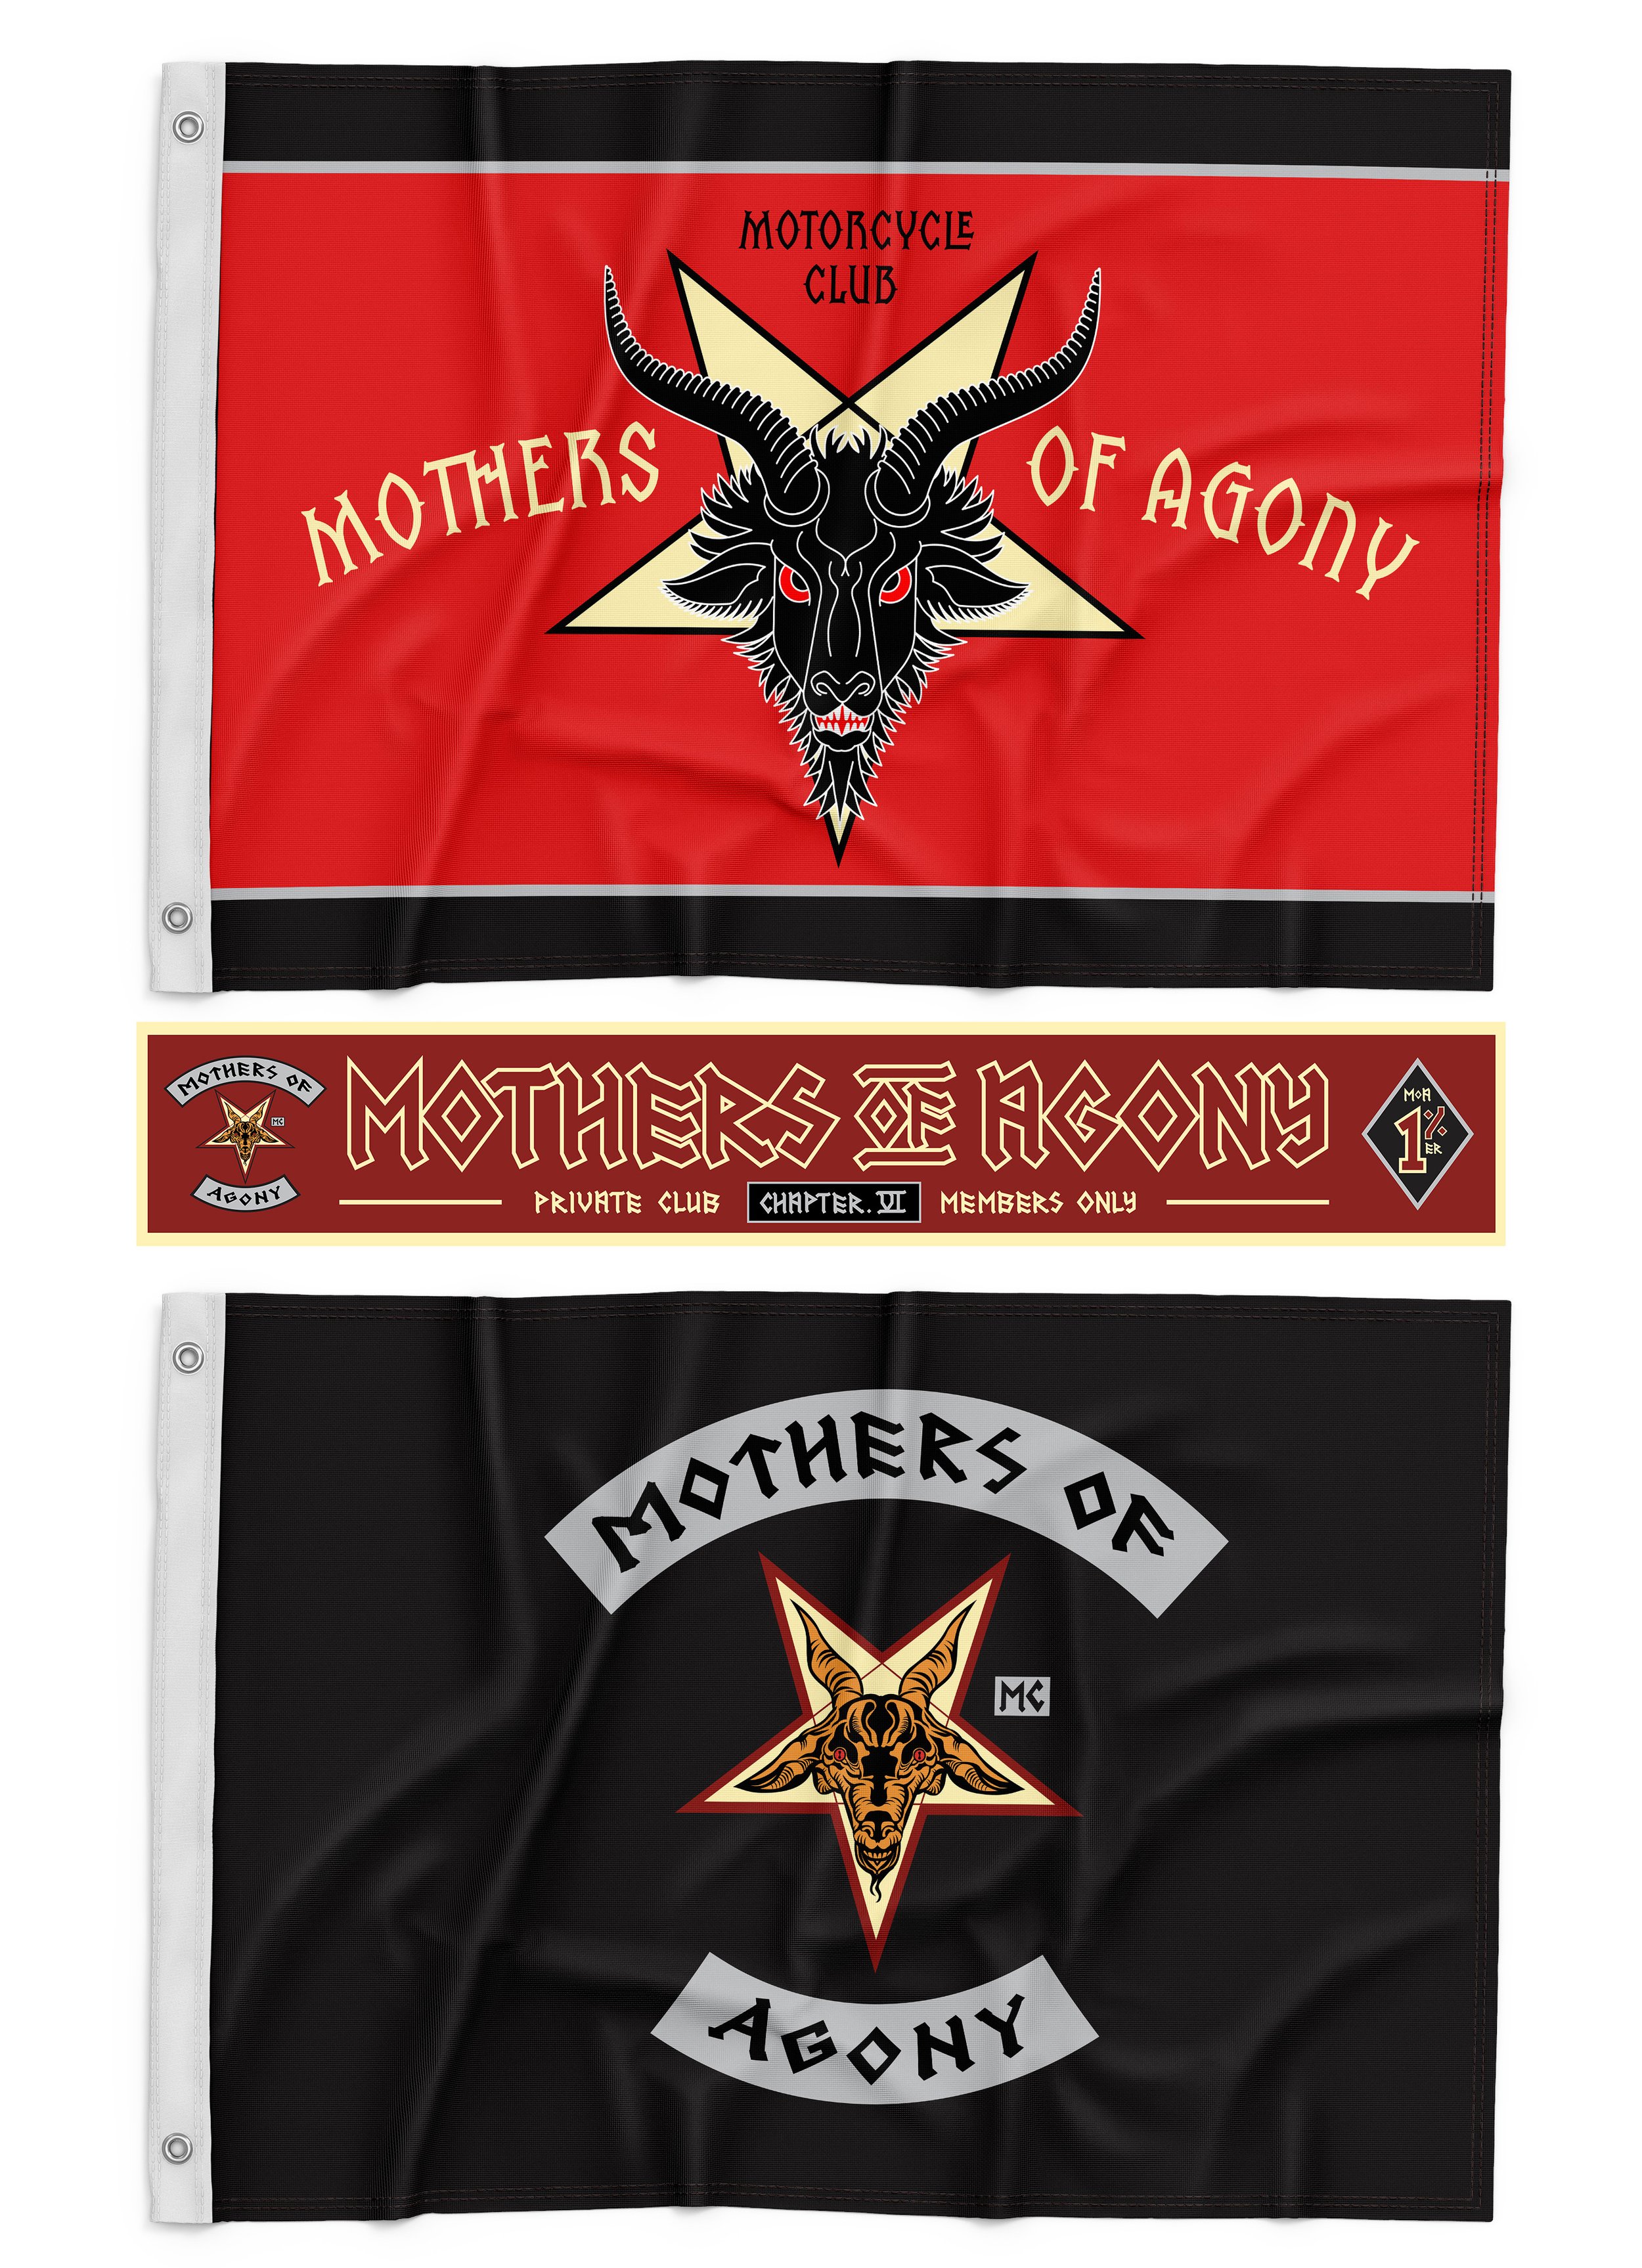 MoA - Flags and banner.jpg